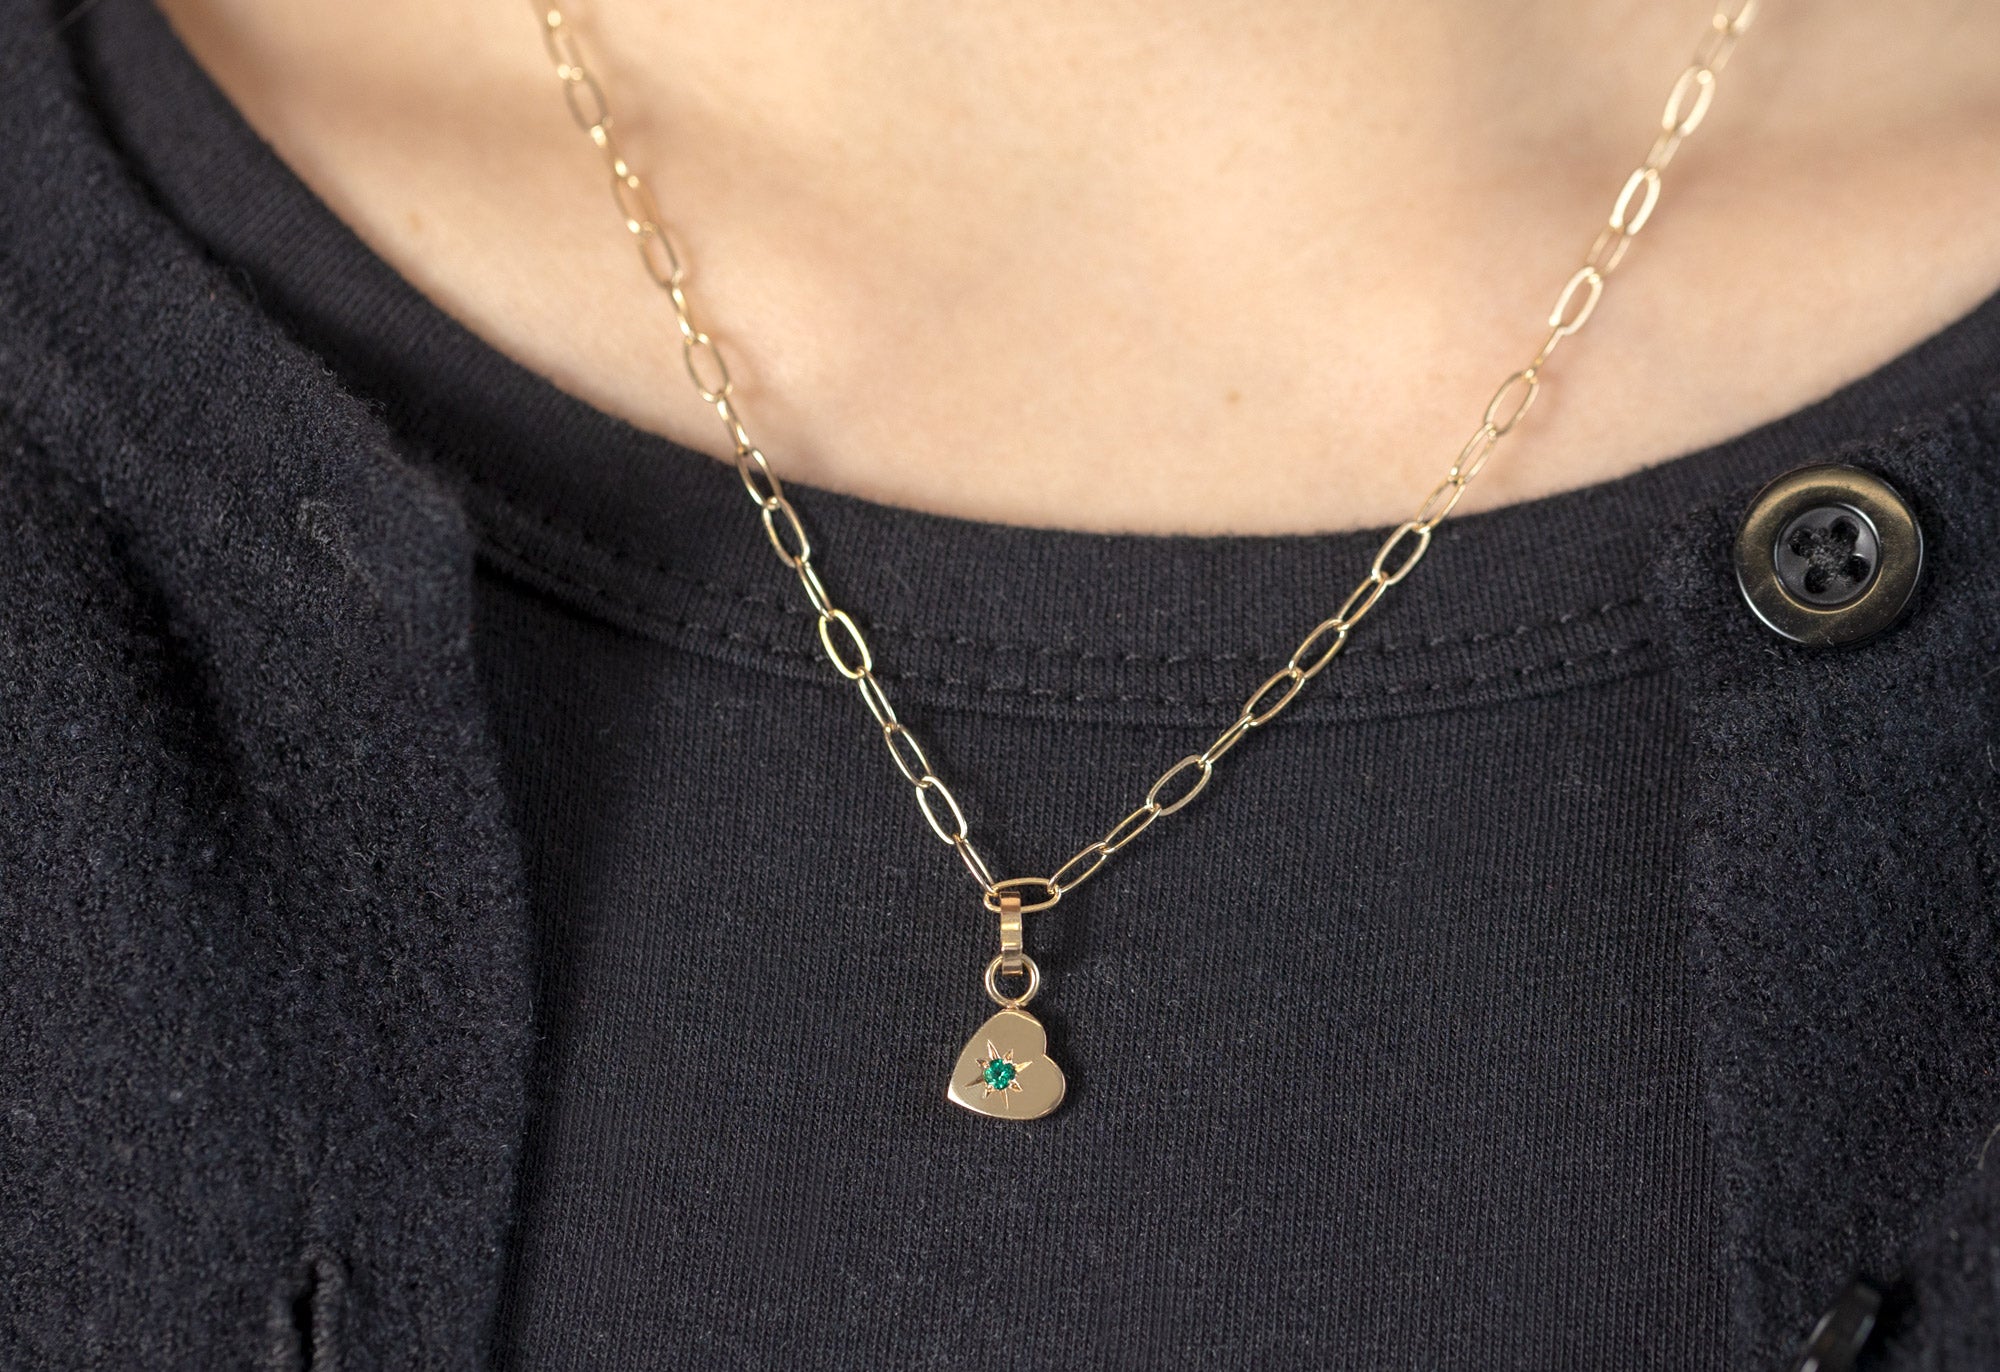 10k Yellow Gold Emerald Heart Charm on Necklace Chain on Model